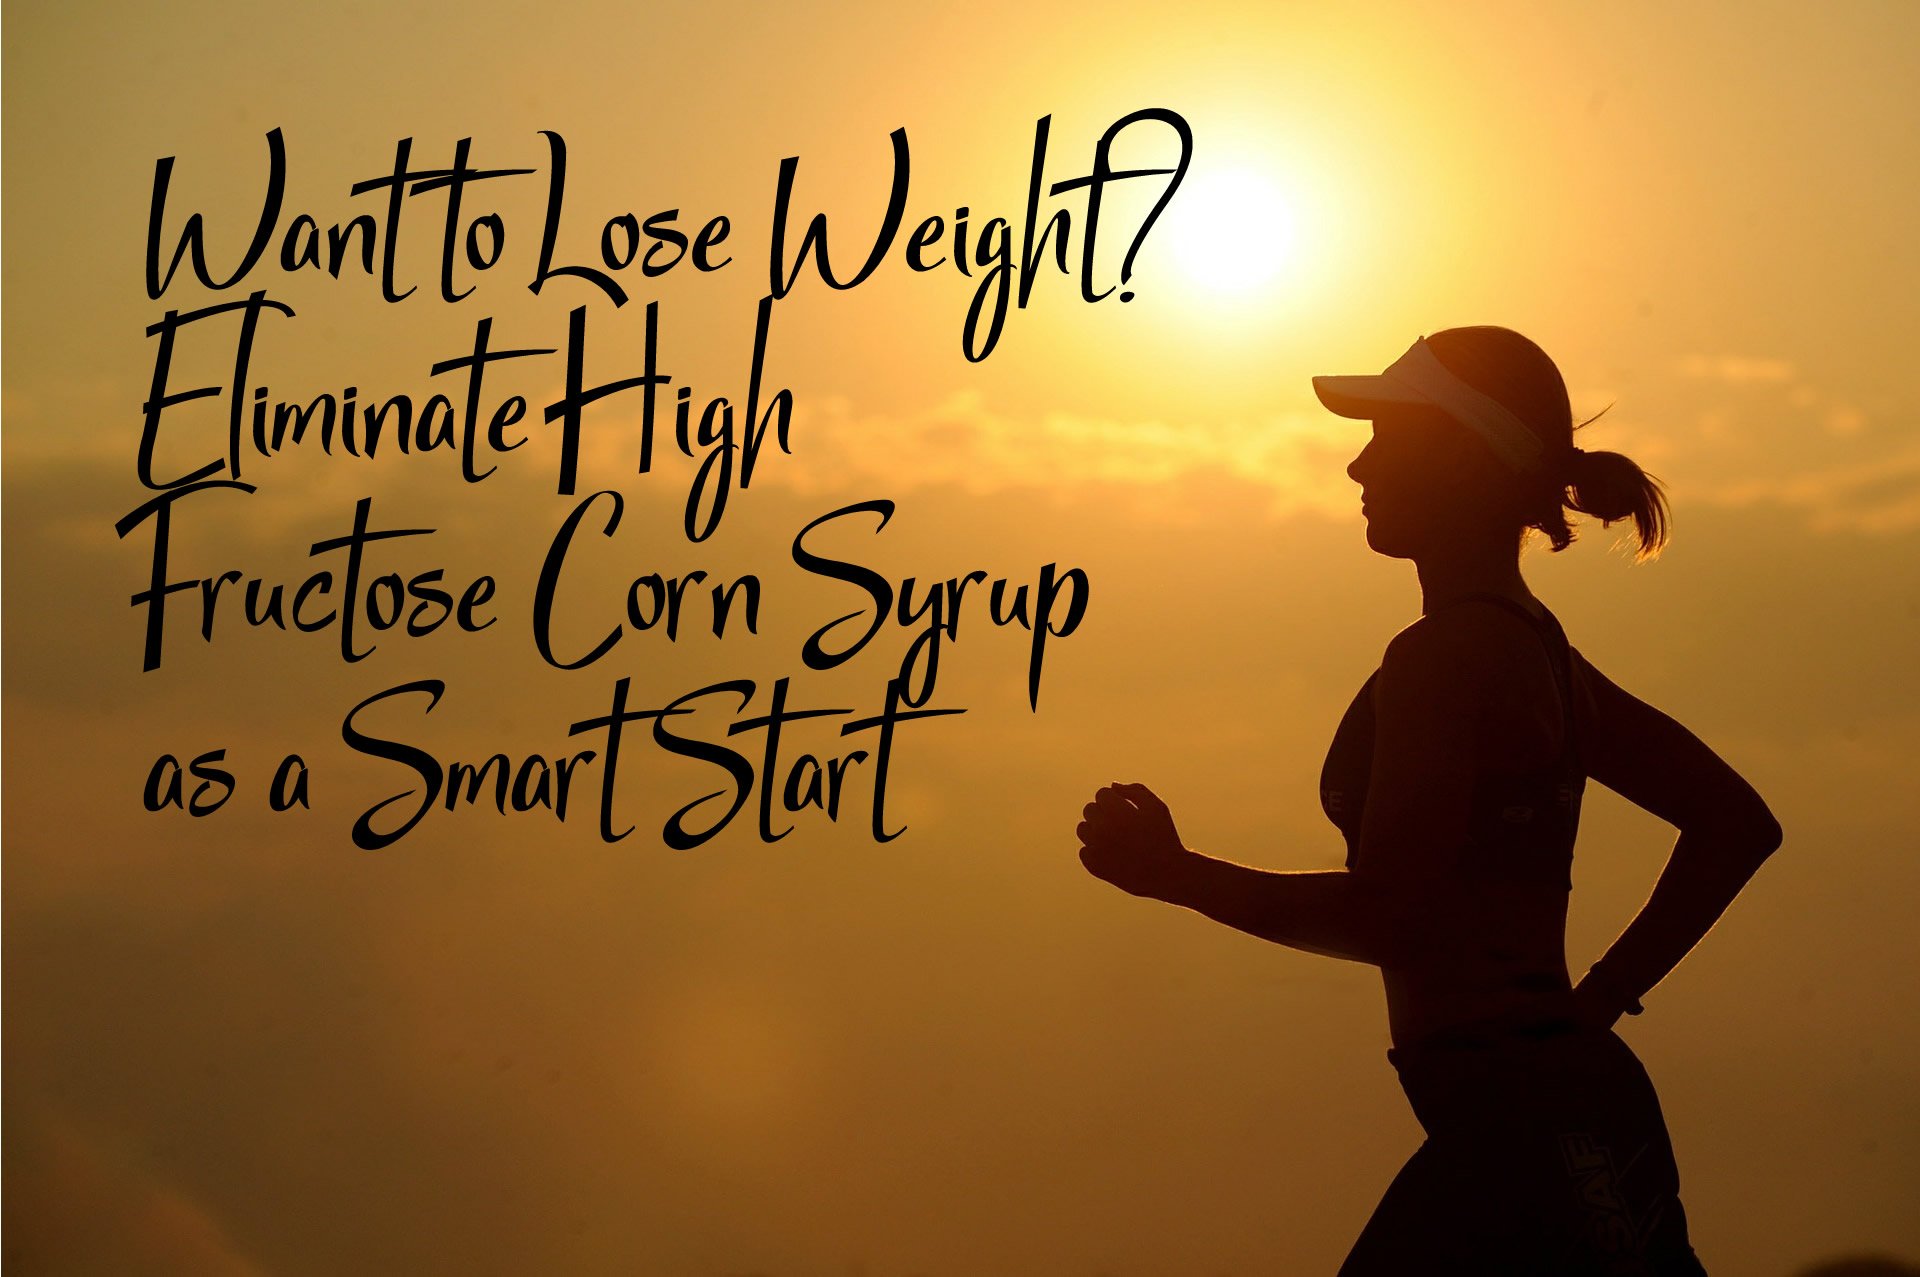 Want to Lose Weight? Eliminate High Fructose Corn Syrup as a Smart Start